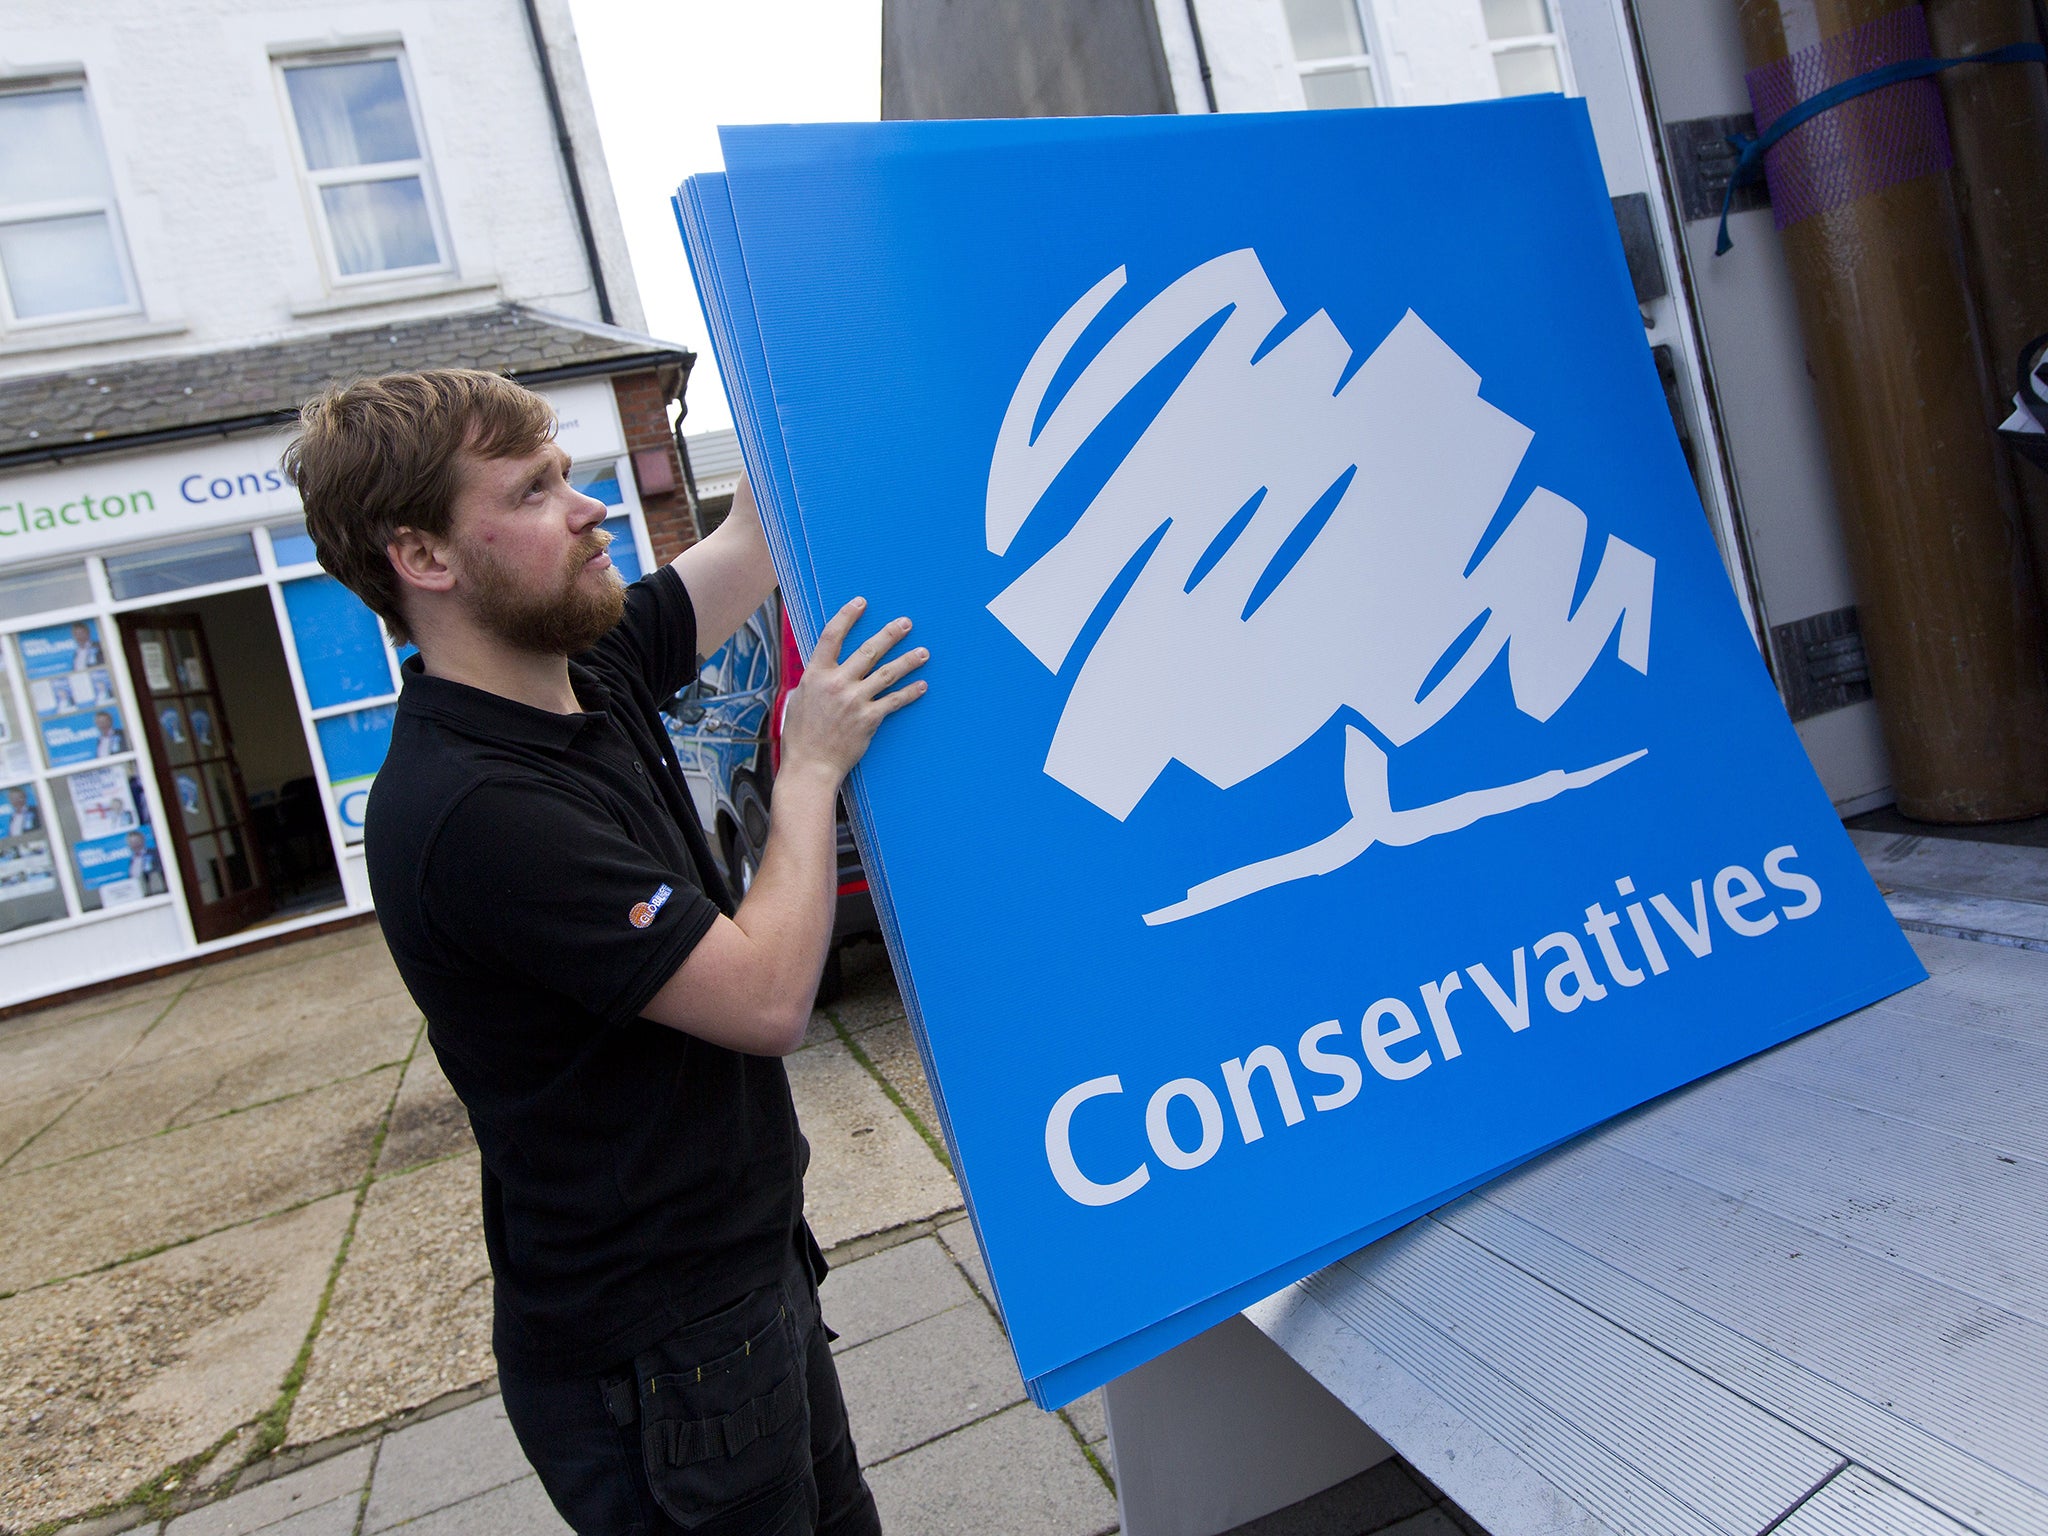 The Independent understands that drafts of the Tories' manifesto were still being rewritten over the Easter weekend; sources suggest that the party is still looking around for new “positive and eye-catching” policy pledges to include